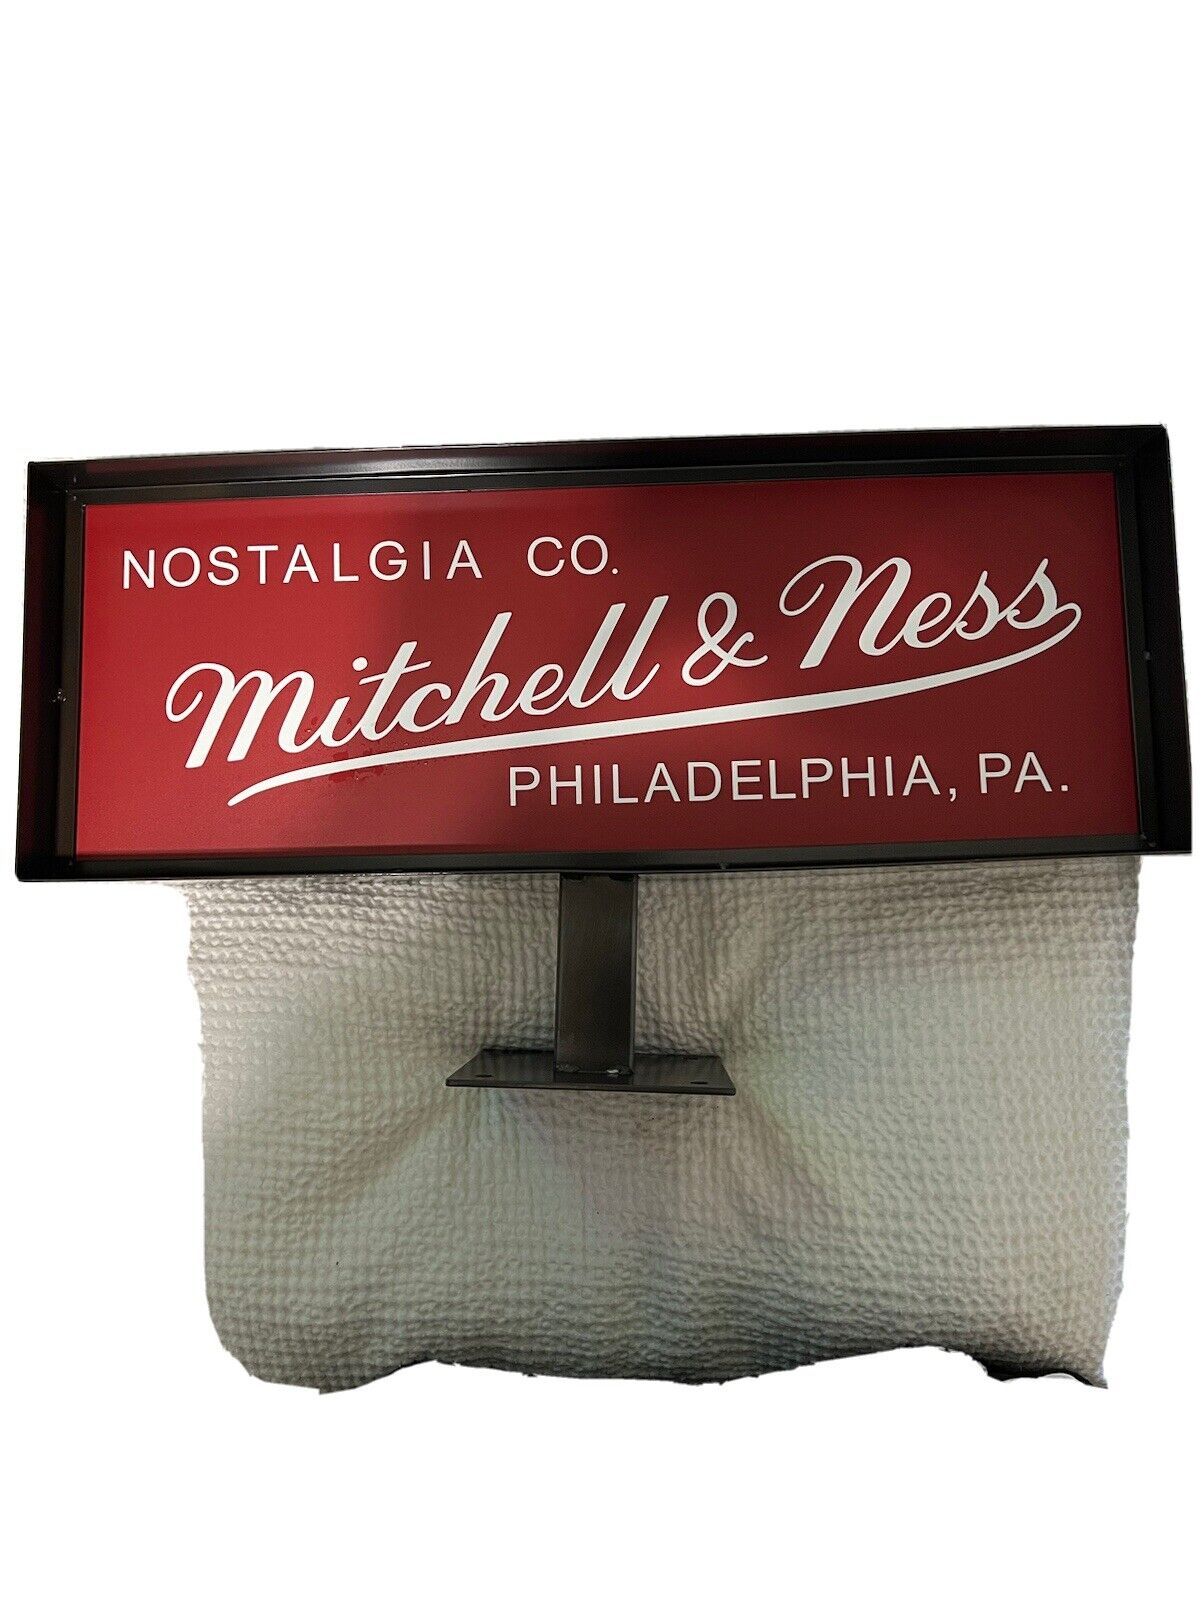 33” Mitchell Ness Display Sign. Can Come With Top Piece, Doesn’t Have Bot. Base